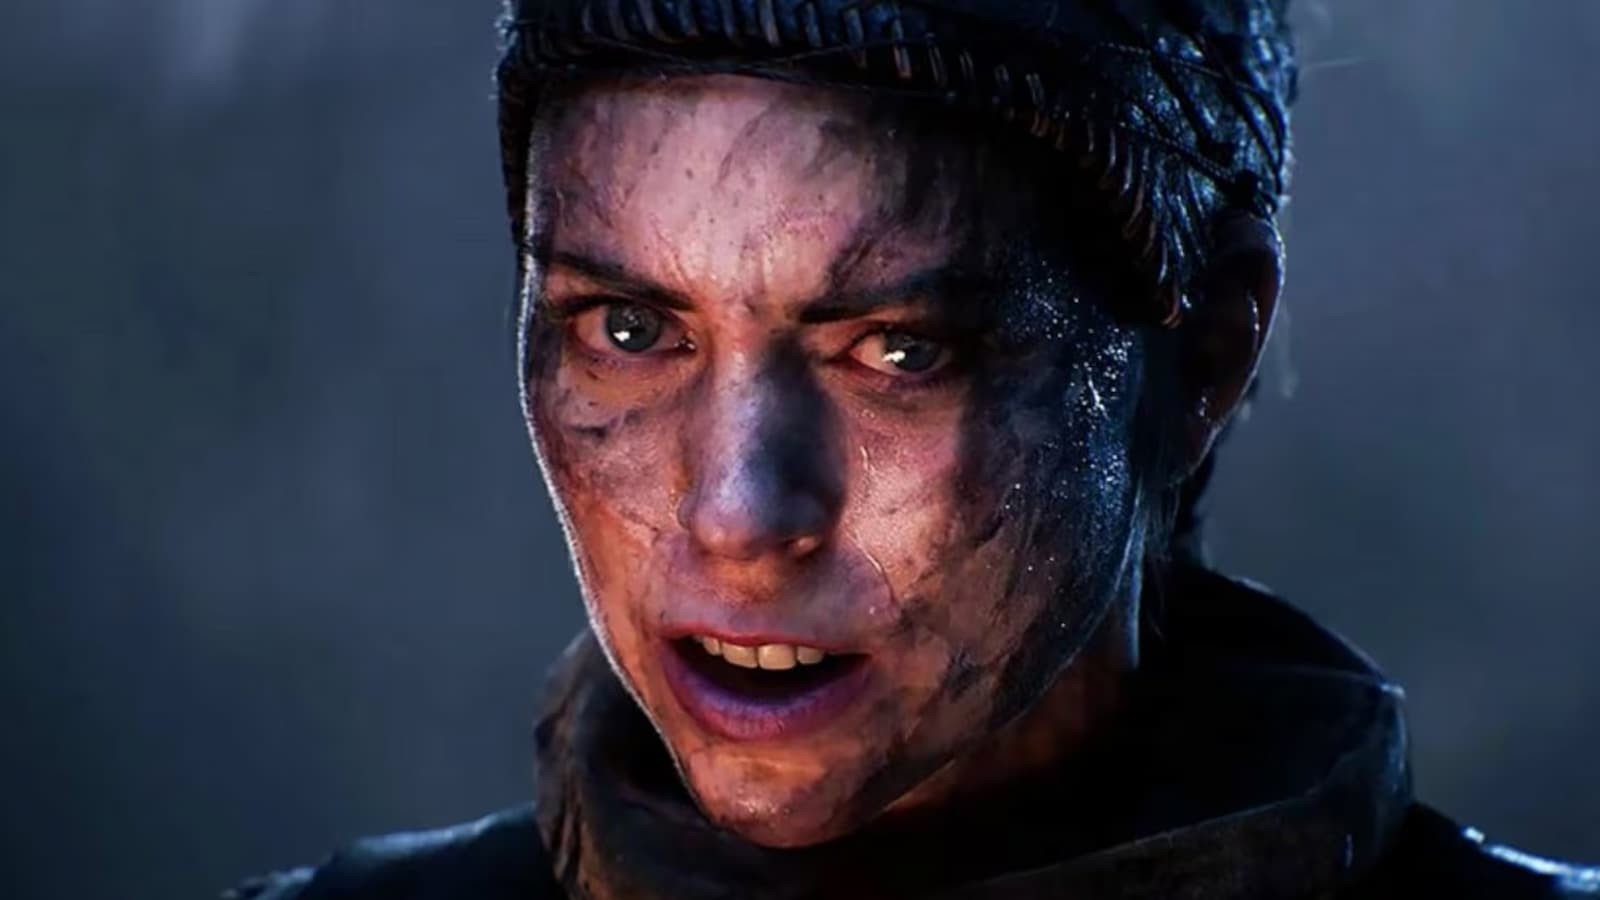 Hellblade 2 will go above and beyond with the immersion.